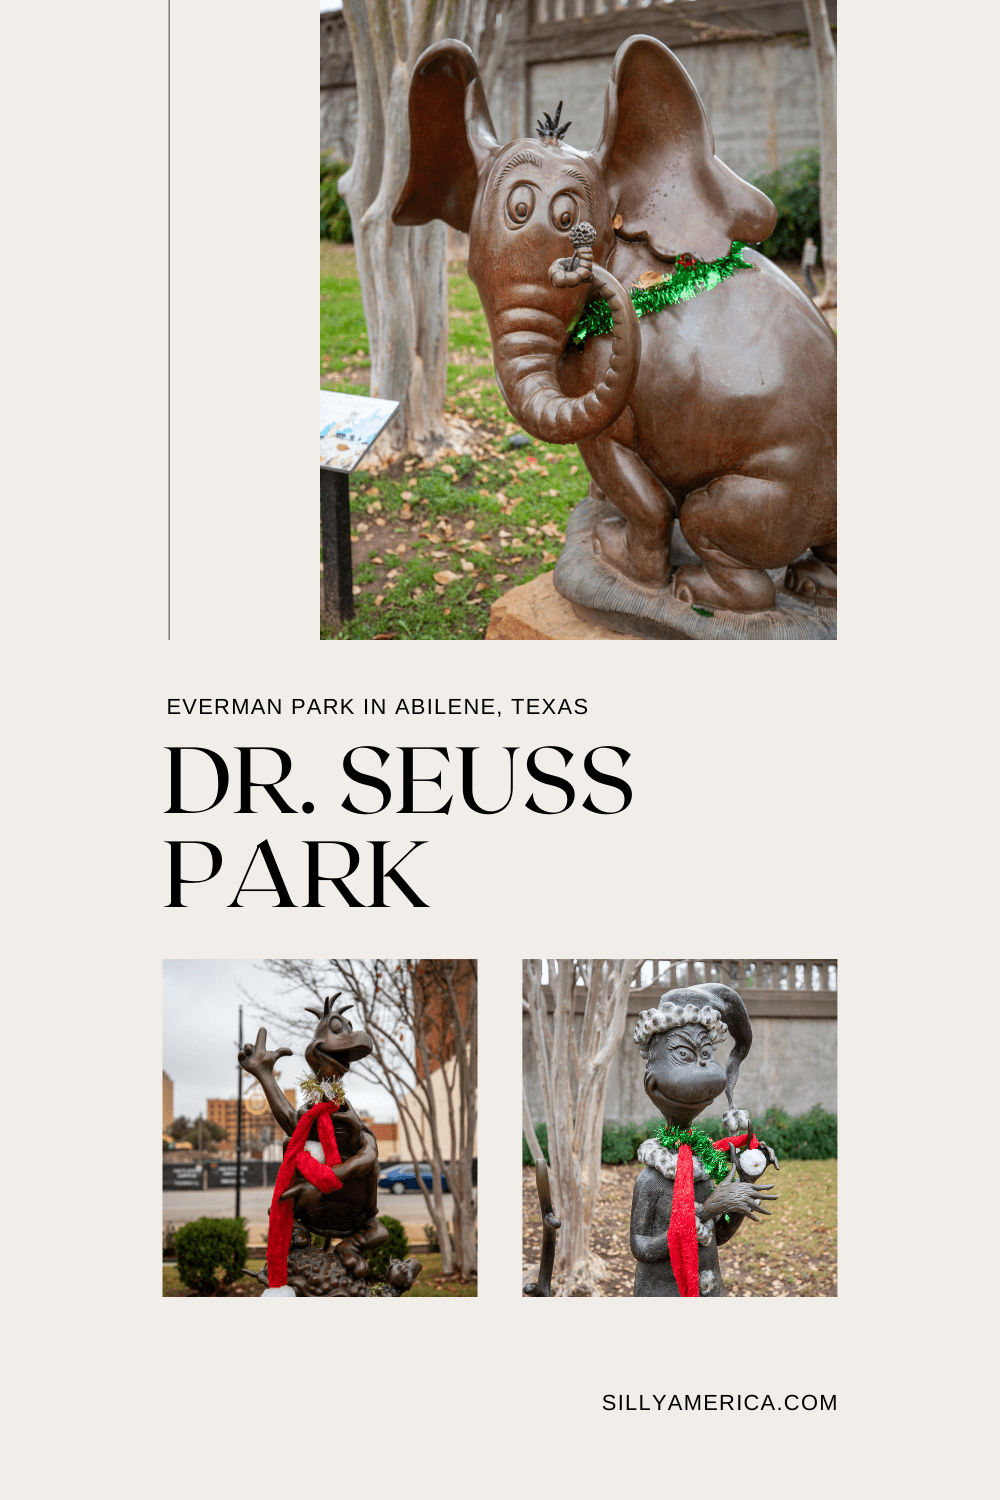 Abilene, Texas is considered the Storybook Capital of America. The town is dedicated to "showcasing the wonders of children’s literature," and is home to the National Center for Children’s Illustrated Literature and the annual Children’s Art & Literacy Festival. You can find many storybook character statues around town. Including these six Dr. Seuss statues at Dr. Seuss Park - Everman Park. #DrSeuss #DrSeussPark #RoadTrip #TexasRoadTrip #Texas #RoadsideAttraction #RoadsideAttractions